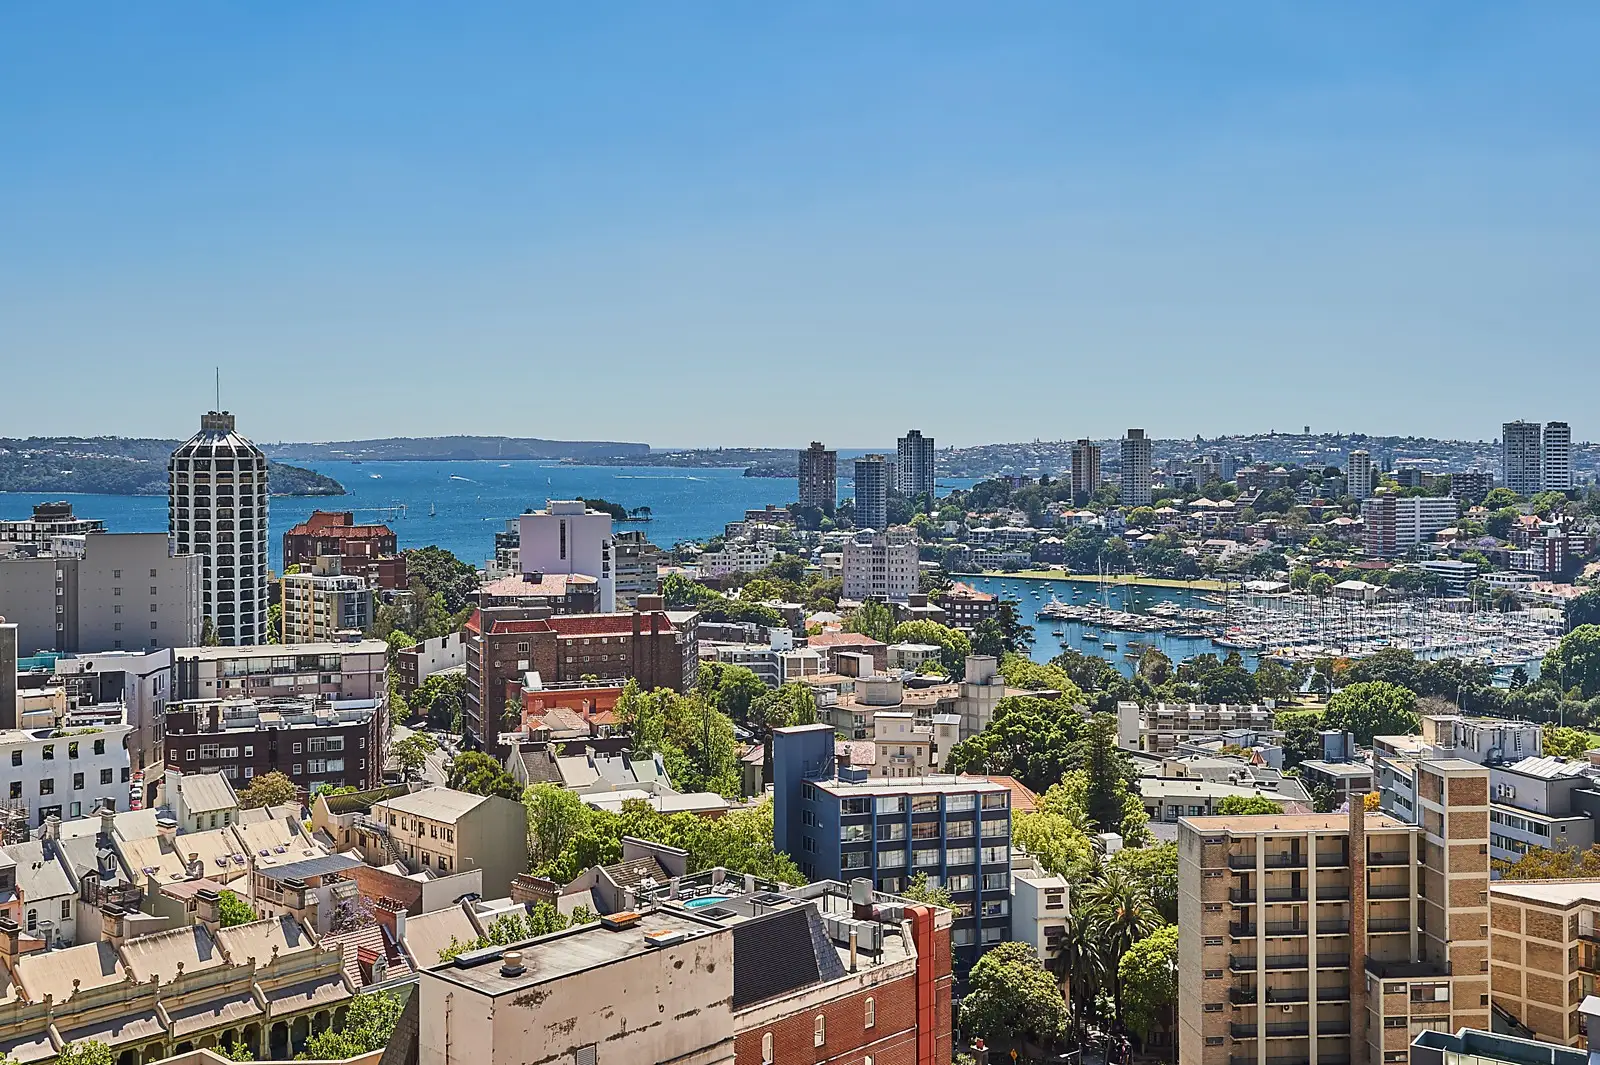 Photo #3: 1809/1 Kings Cross Road, Potts Point - Sold by Sydney Sotheby's International Realty